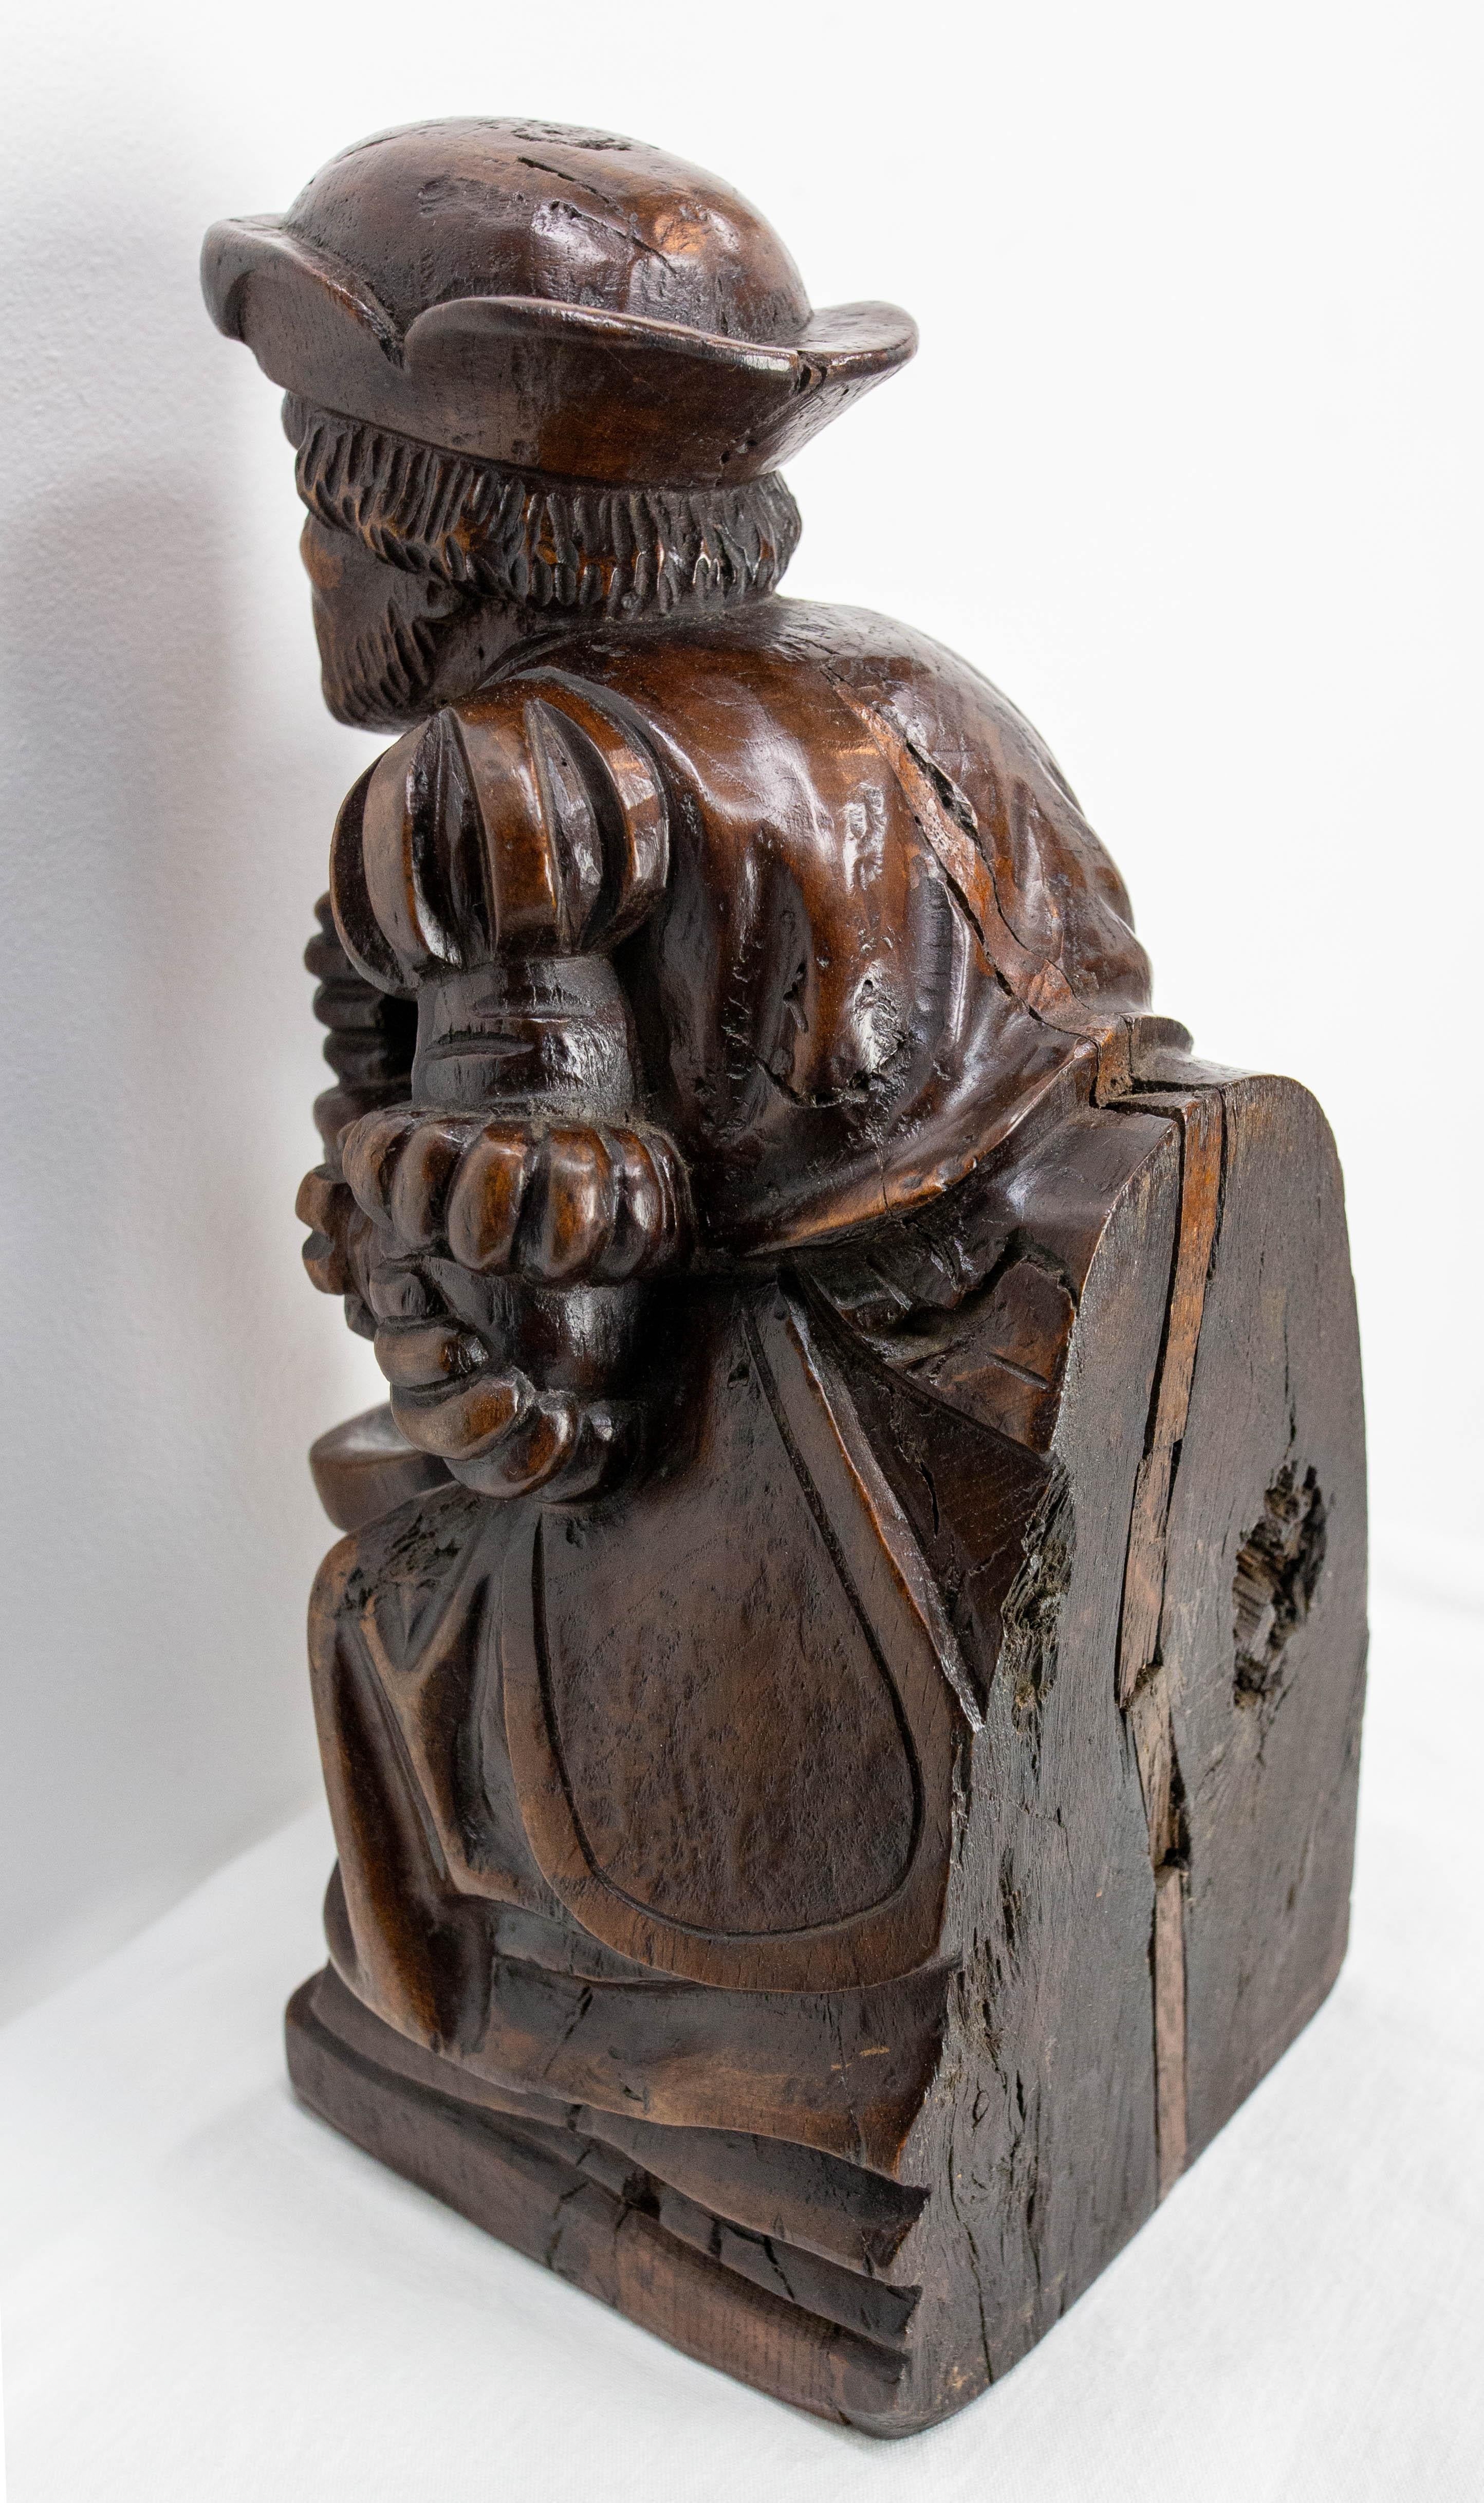 French handmade wood statue in oak.

Good condition and nice patina

Shipping:
10 / 11 / 41 cm 1.1 Kg.